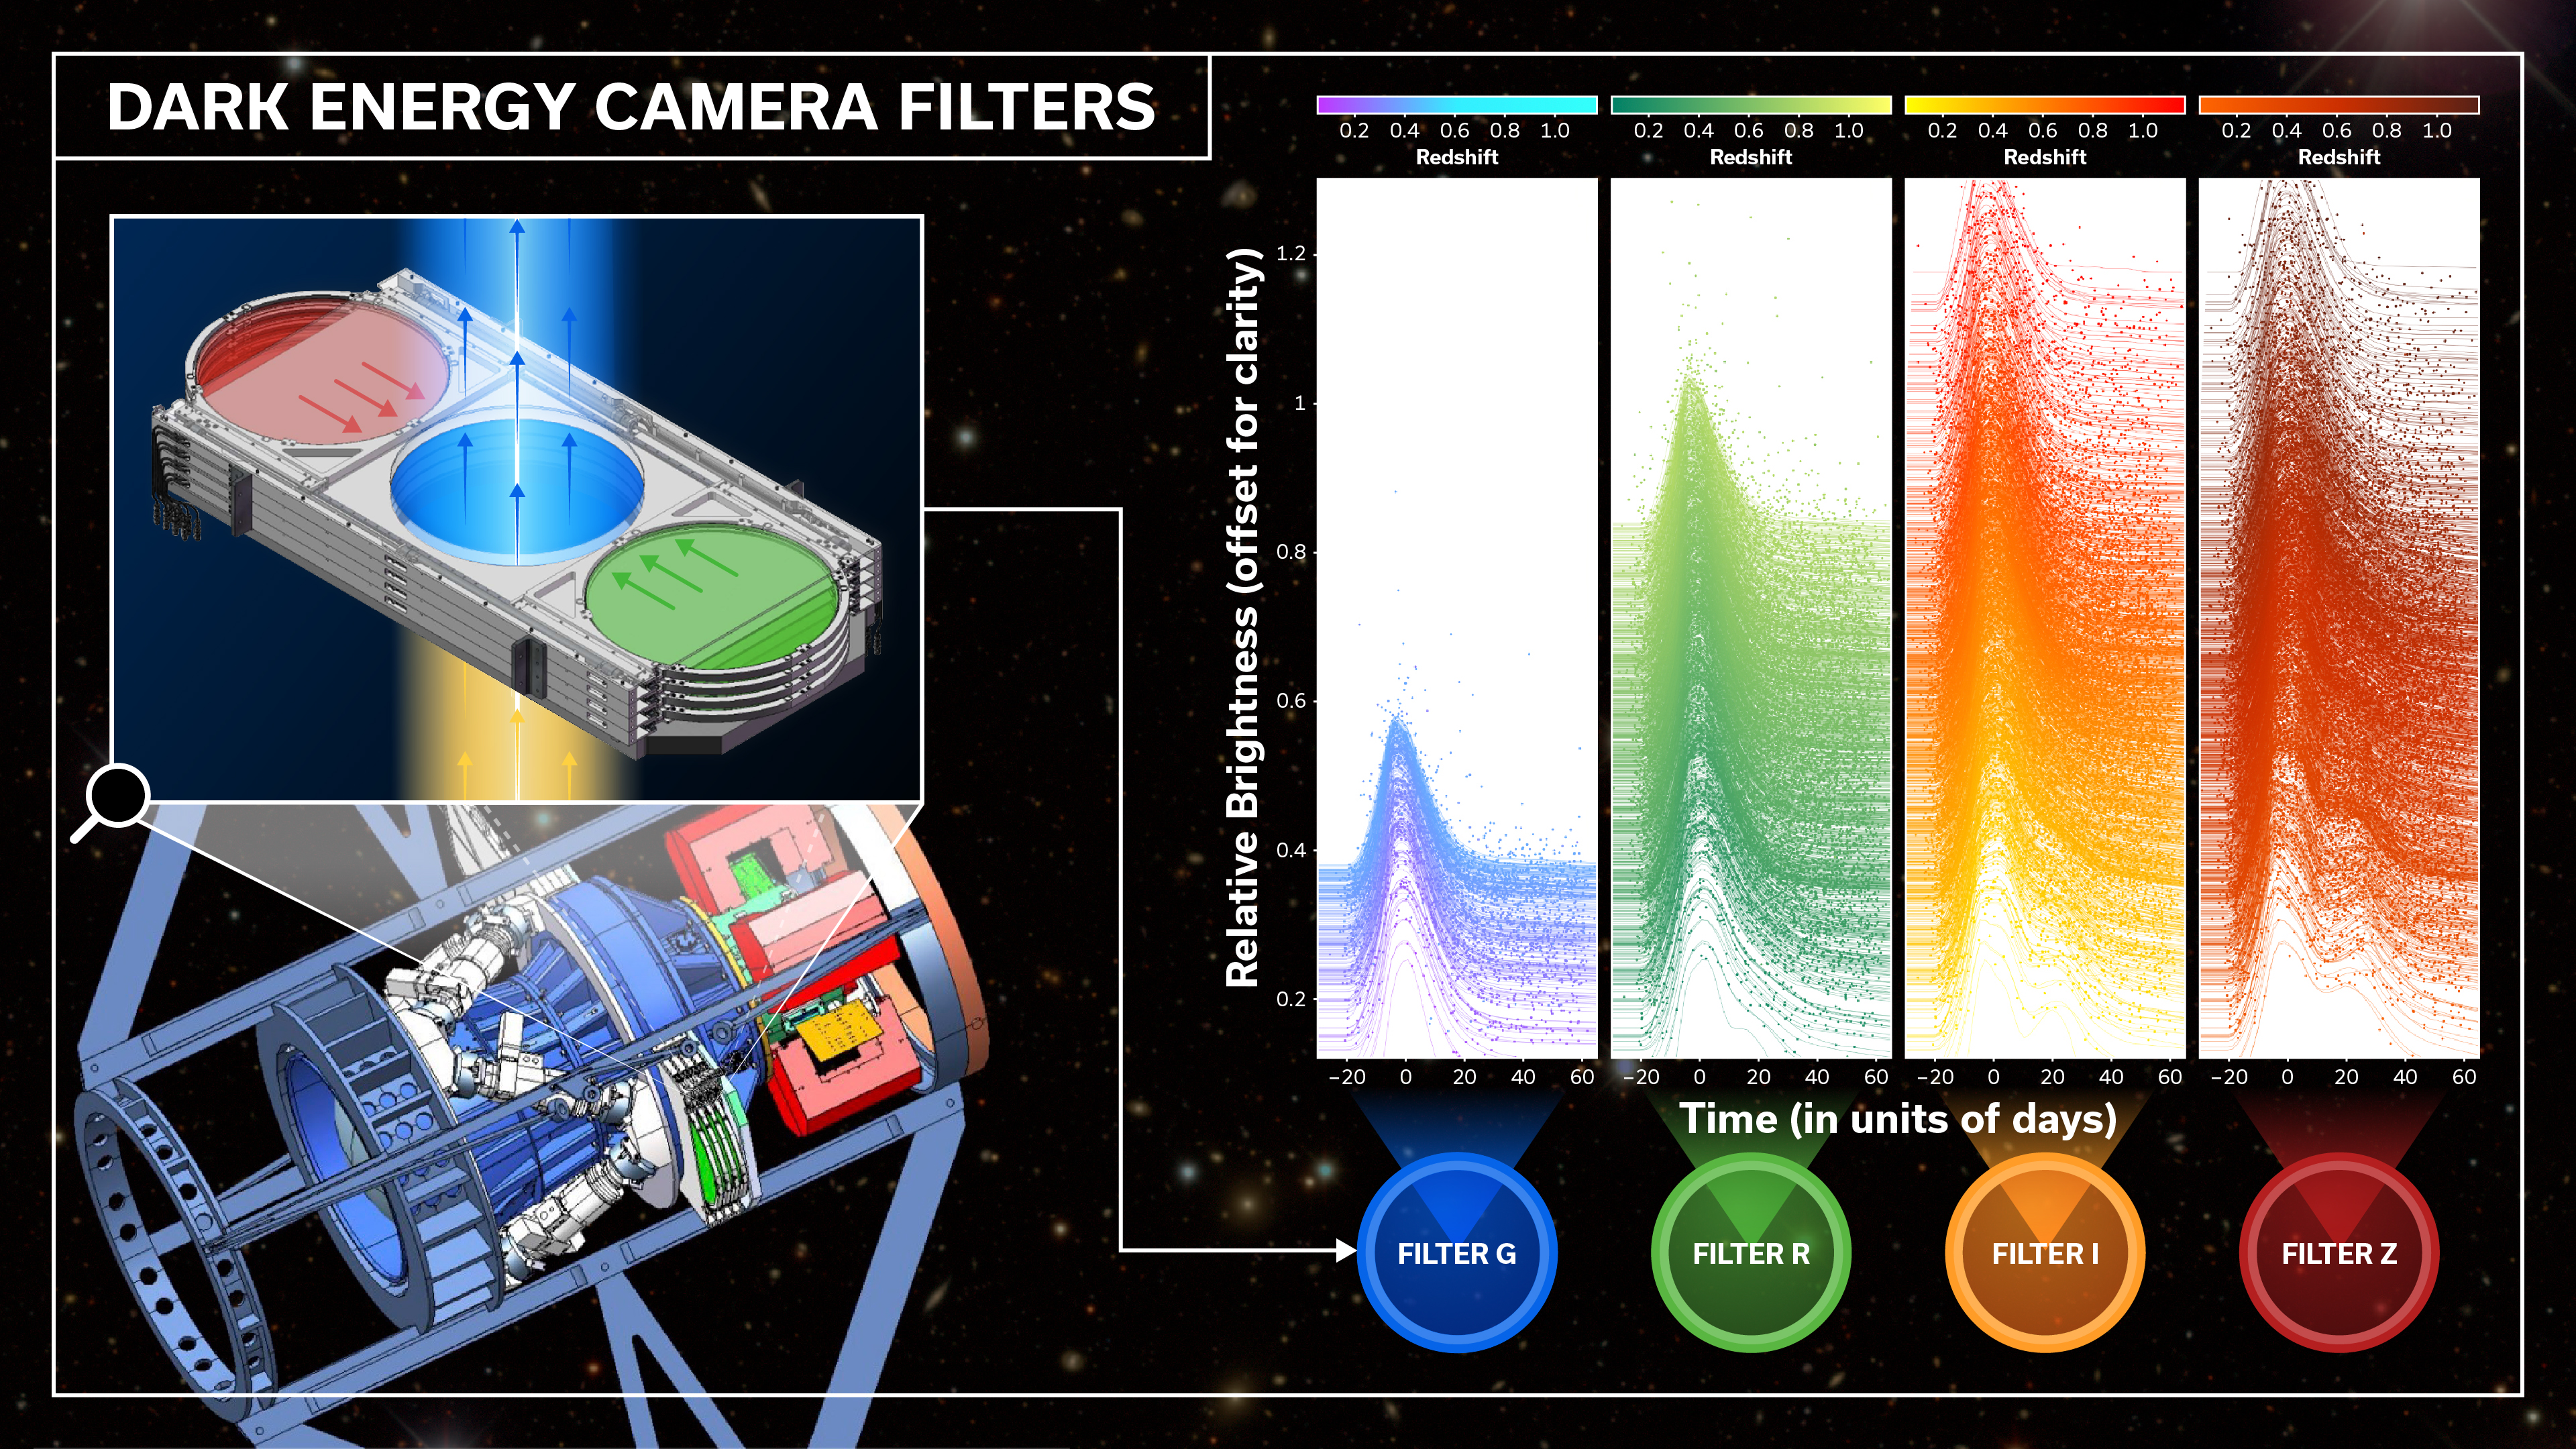 The image depicts the filter system installed on the Dark Energy Camera used by DES to discover supernovae and monitor their brightness evolution. The method uses an unprecedented four filters: g (bluest filter), r, i, and z (reddest filter).